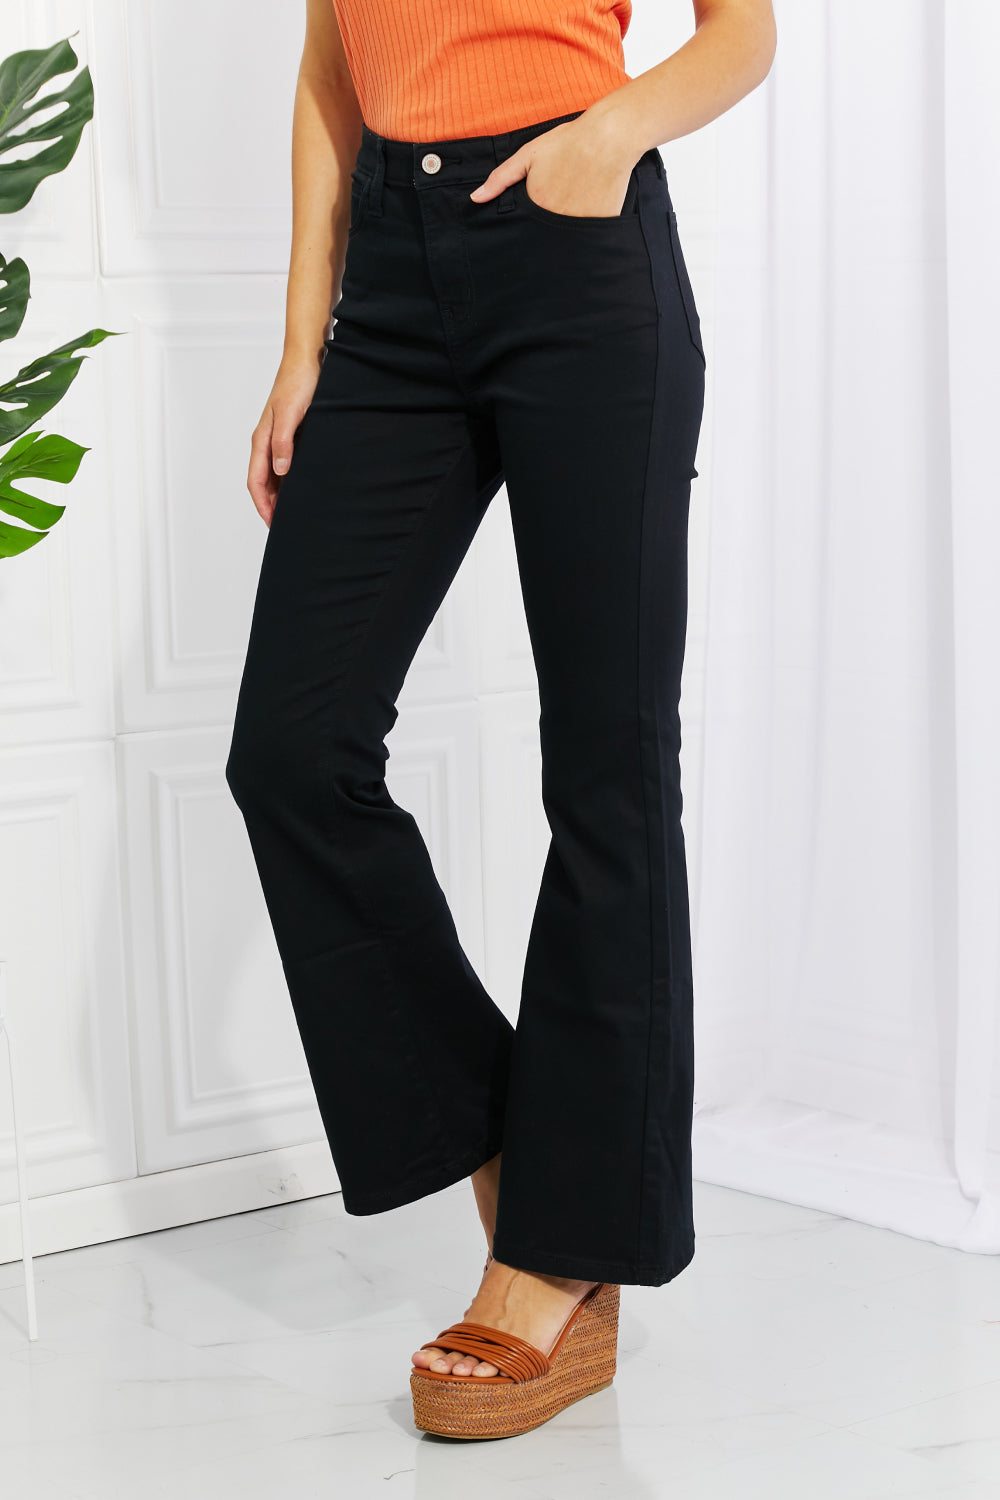 Zenana Clementine Full Size High-Rise Bootcut Pants in Black- ONLINE ONLY 2-10 day Shipping